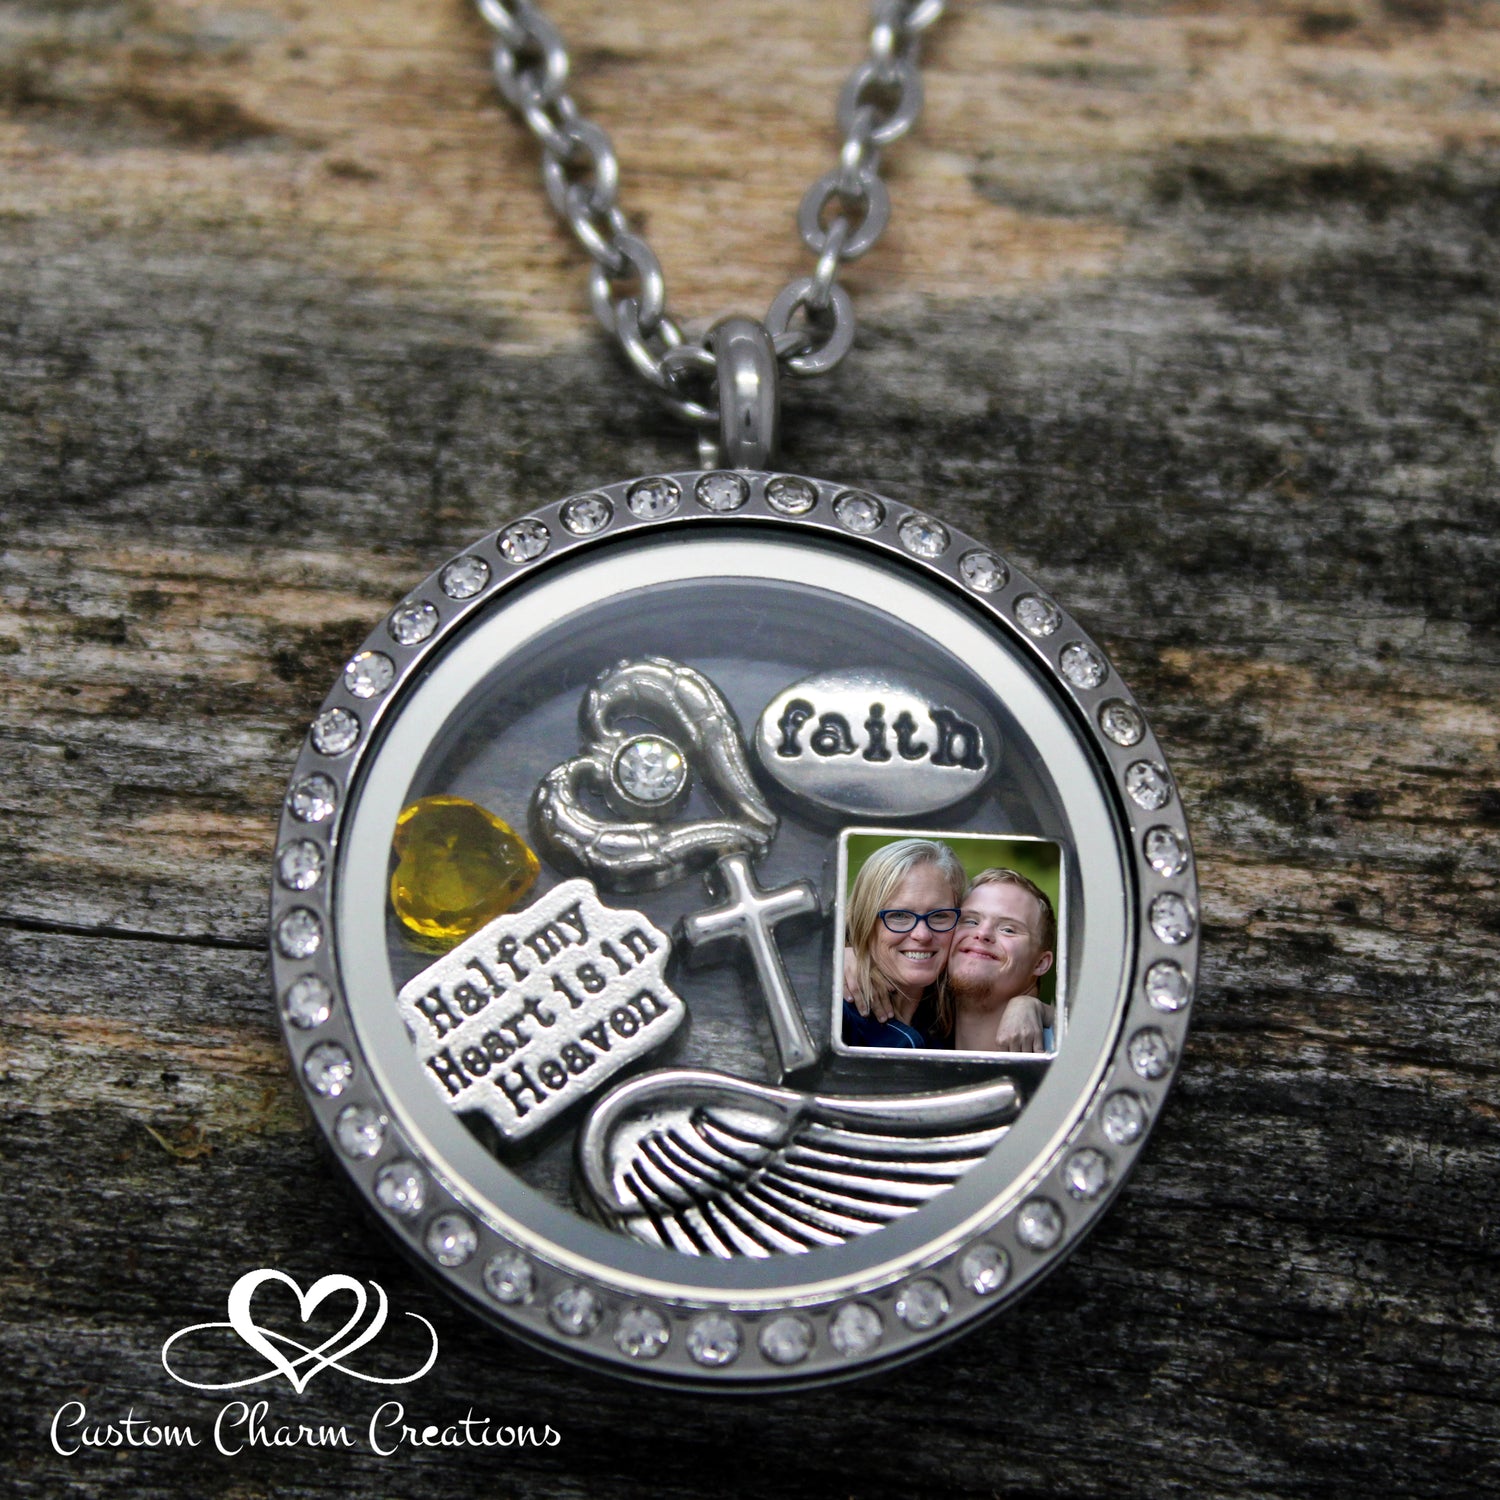 Daddys Girl Necklace, Daughter Necklace From Mom Floating Charm Necklace  Mother and Daughter Necklace, Daughter Jewelry Floating Charm Locket Gift  Set